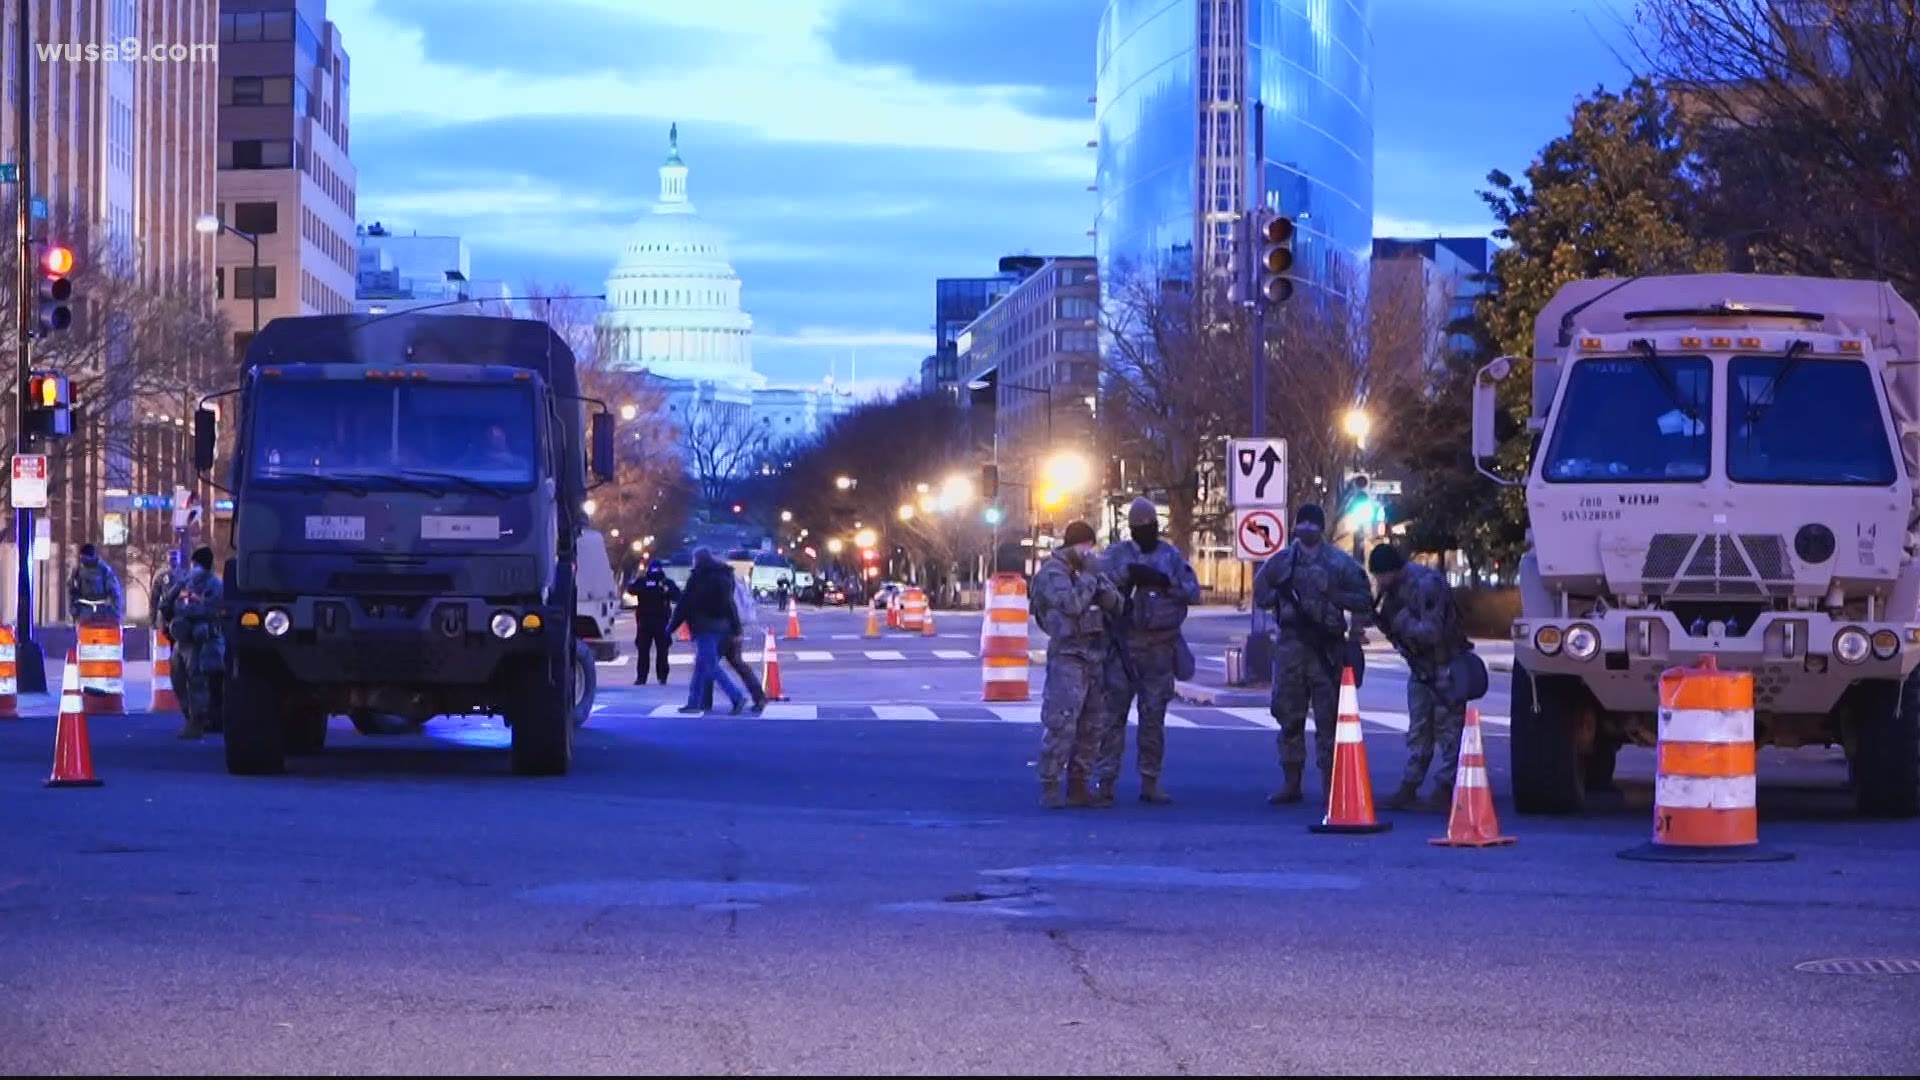 Acts of violence and lingering threats of domestic terrorism in Washington, D.C. have led federal and city officials to ramp up security ahead of Joe Biden's inaugur